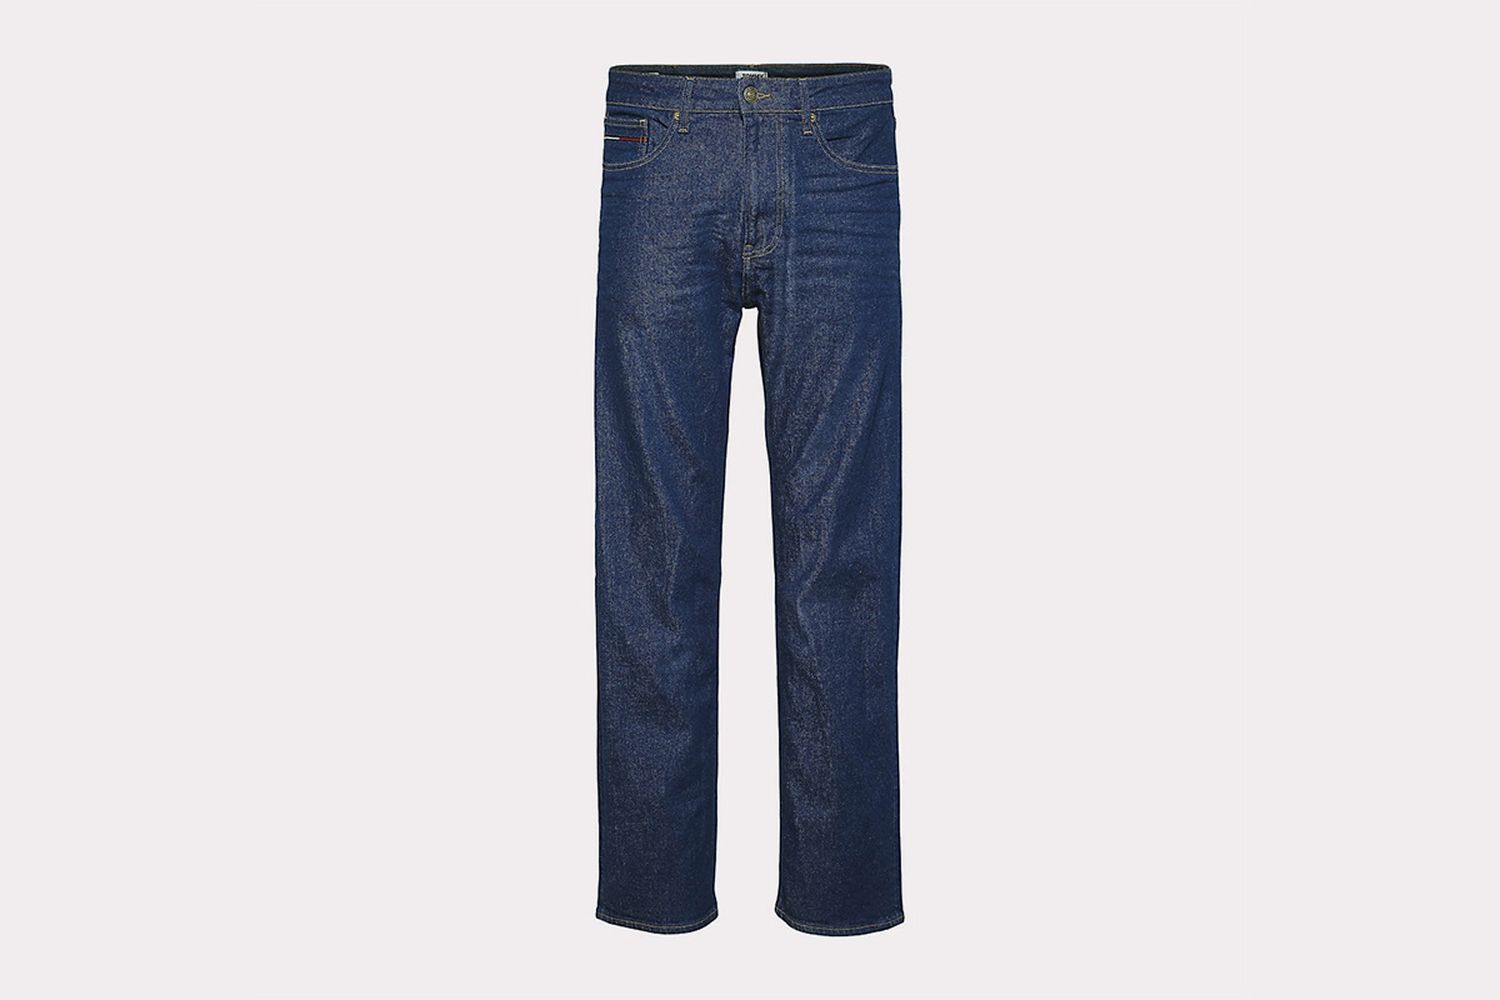 TJ 1951 Relaxed Fit Jeans